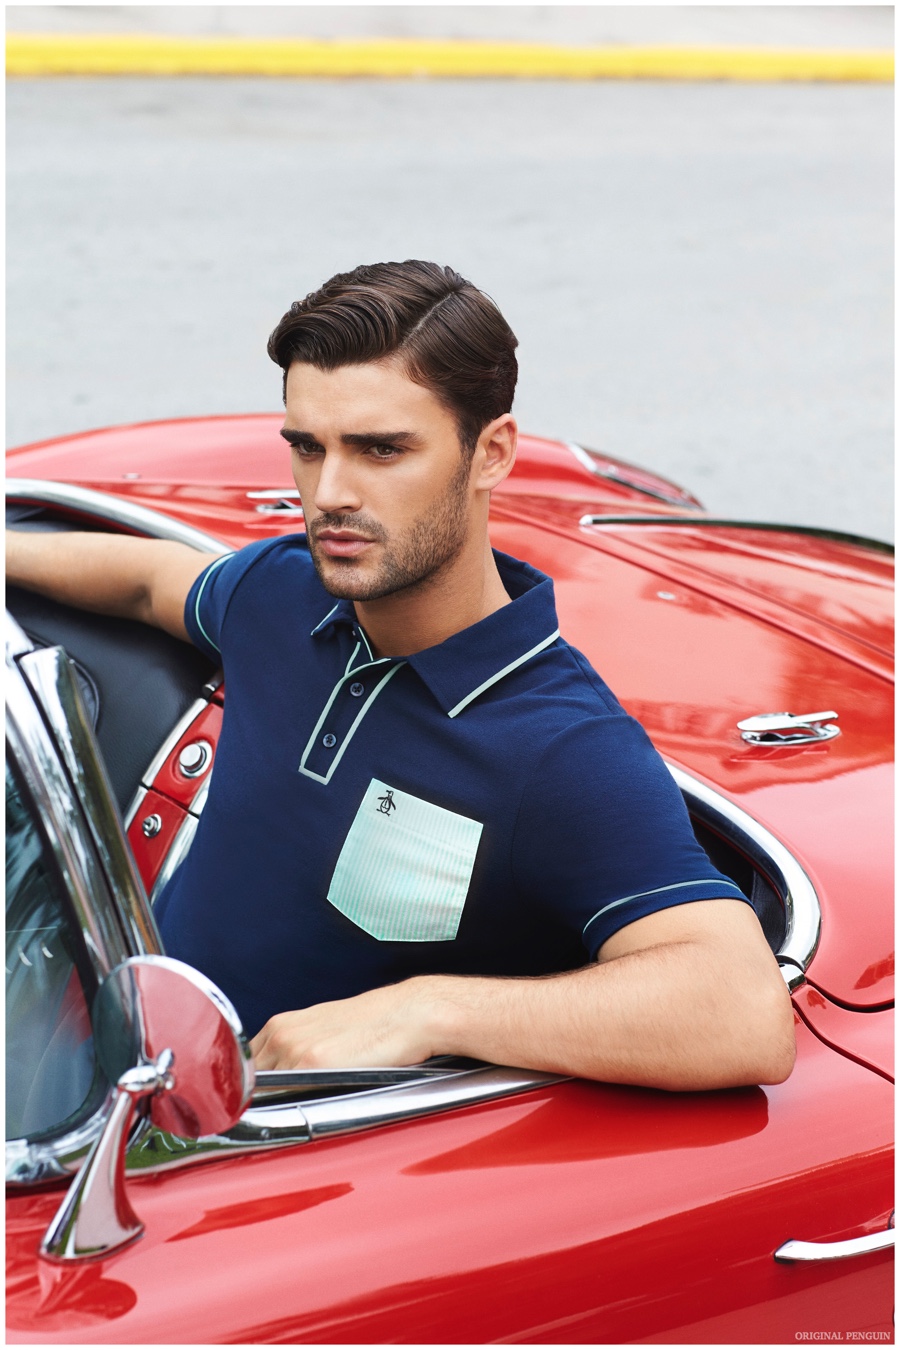 Original Penguin Heads to Miami with 1950s Inspired Styles ...